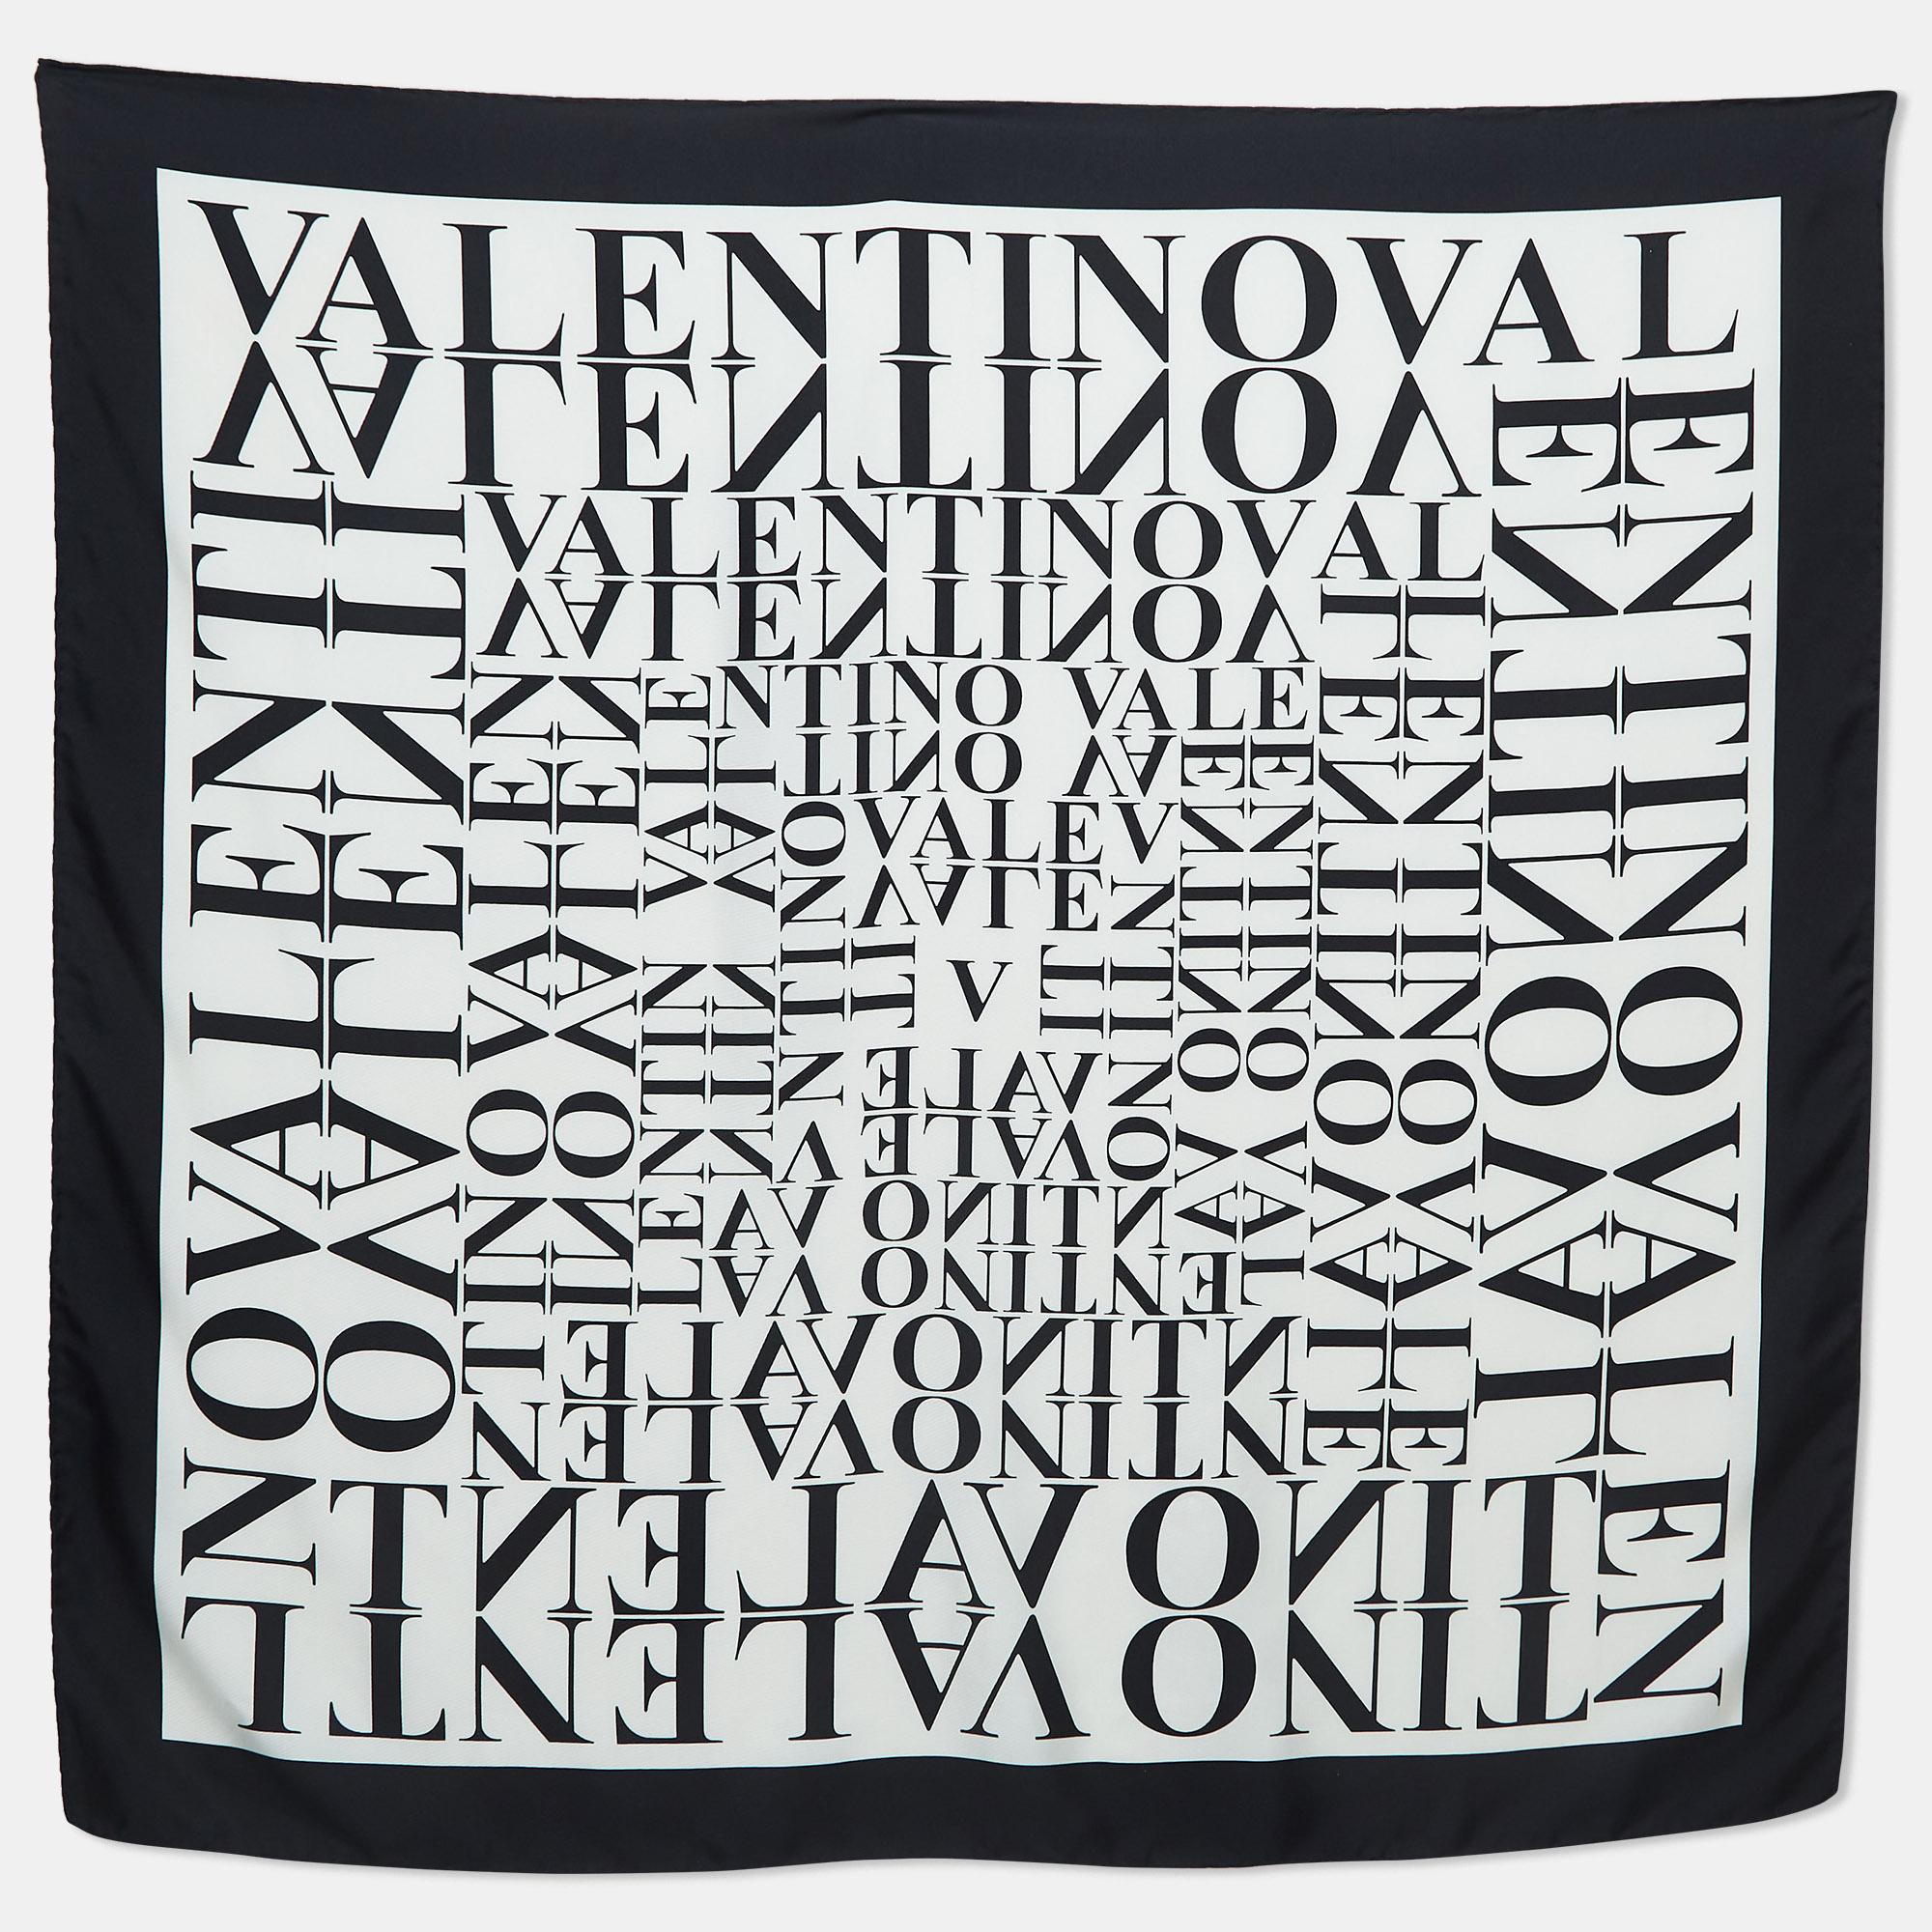 The Valentino Sscarf exudes timeless elegance with its luxurious silk fabric adorned with the iconic Valentino signature motif. Featuring a harmonious blend of sophistication and style, this accessory effortlessly elevates any ensemble with its